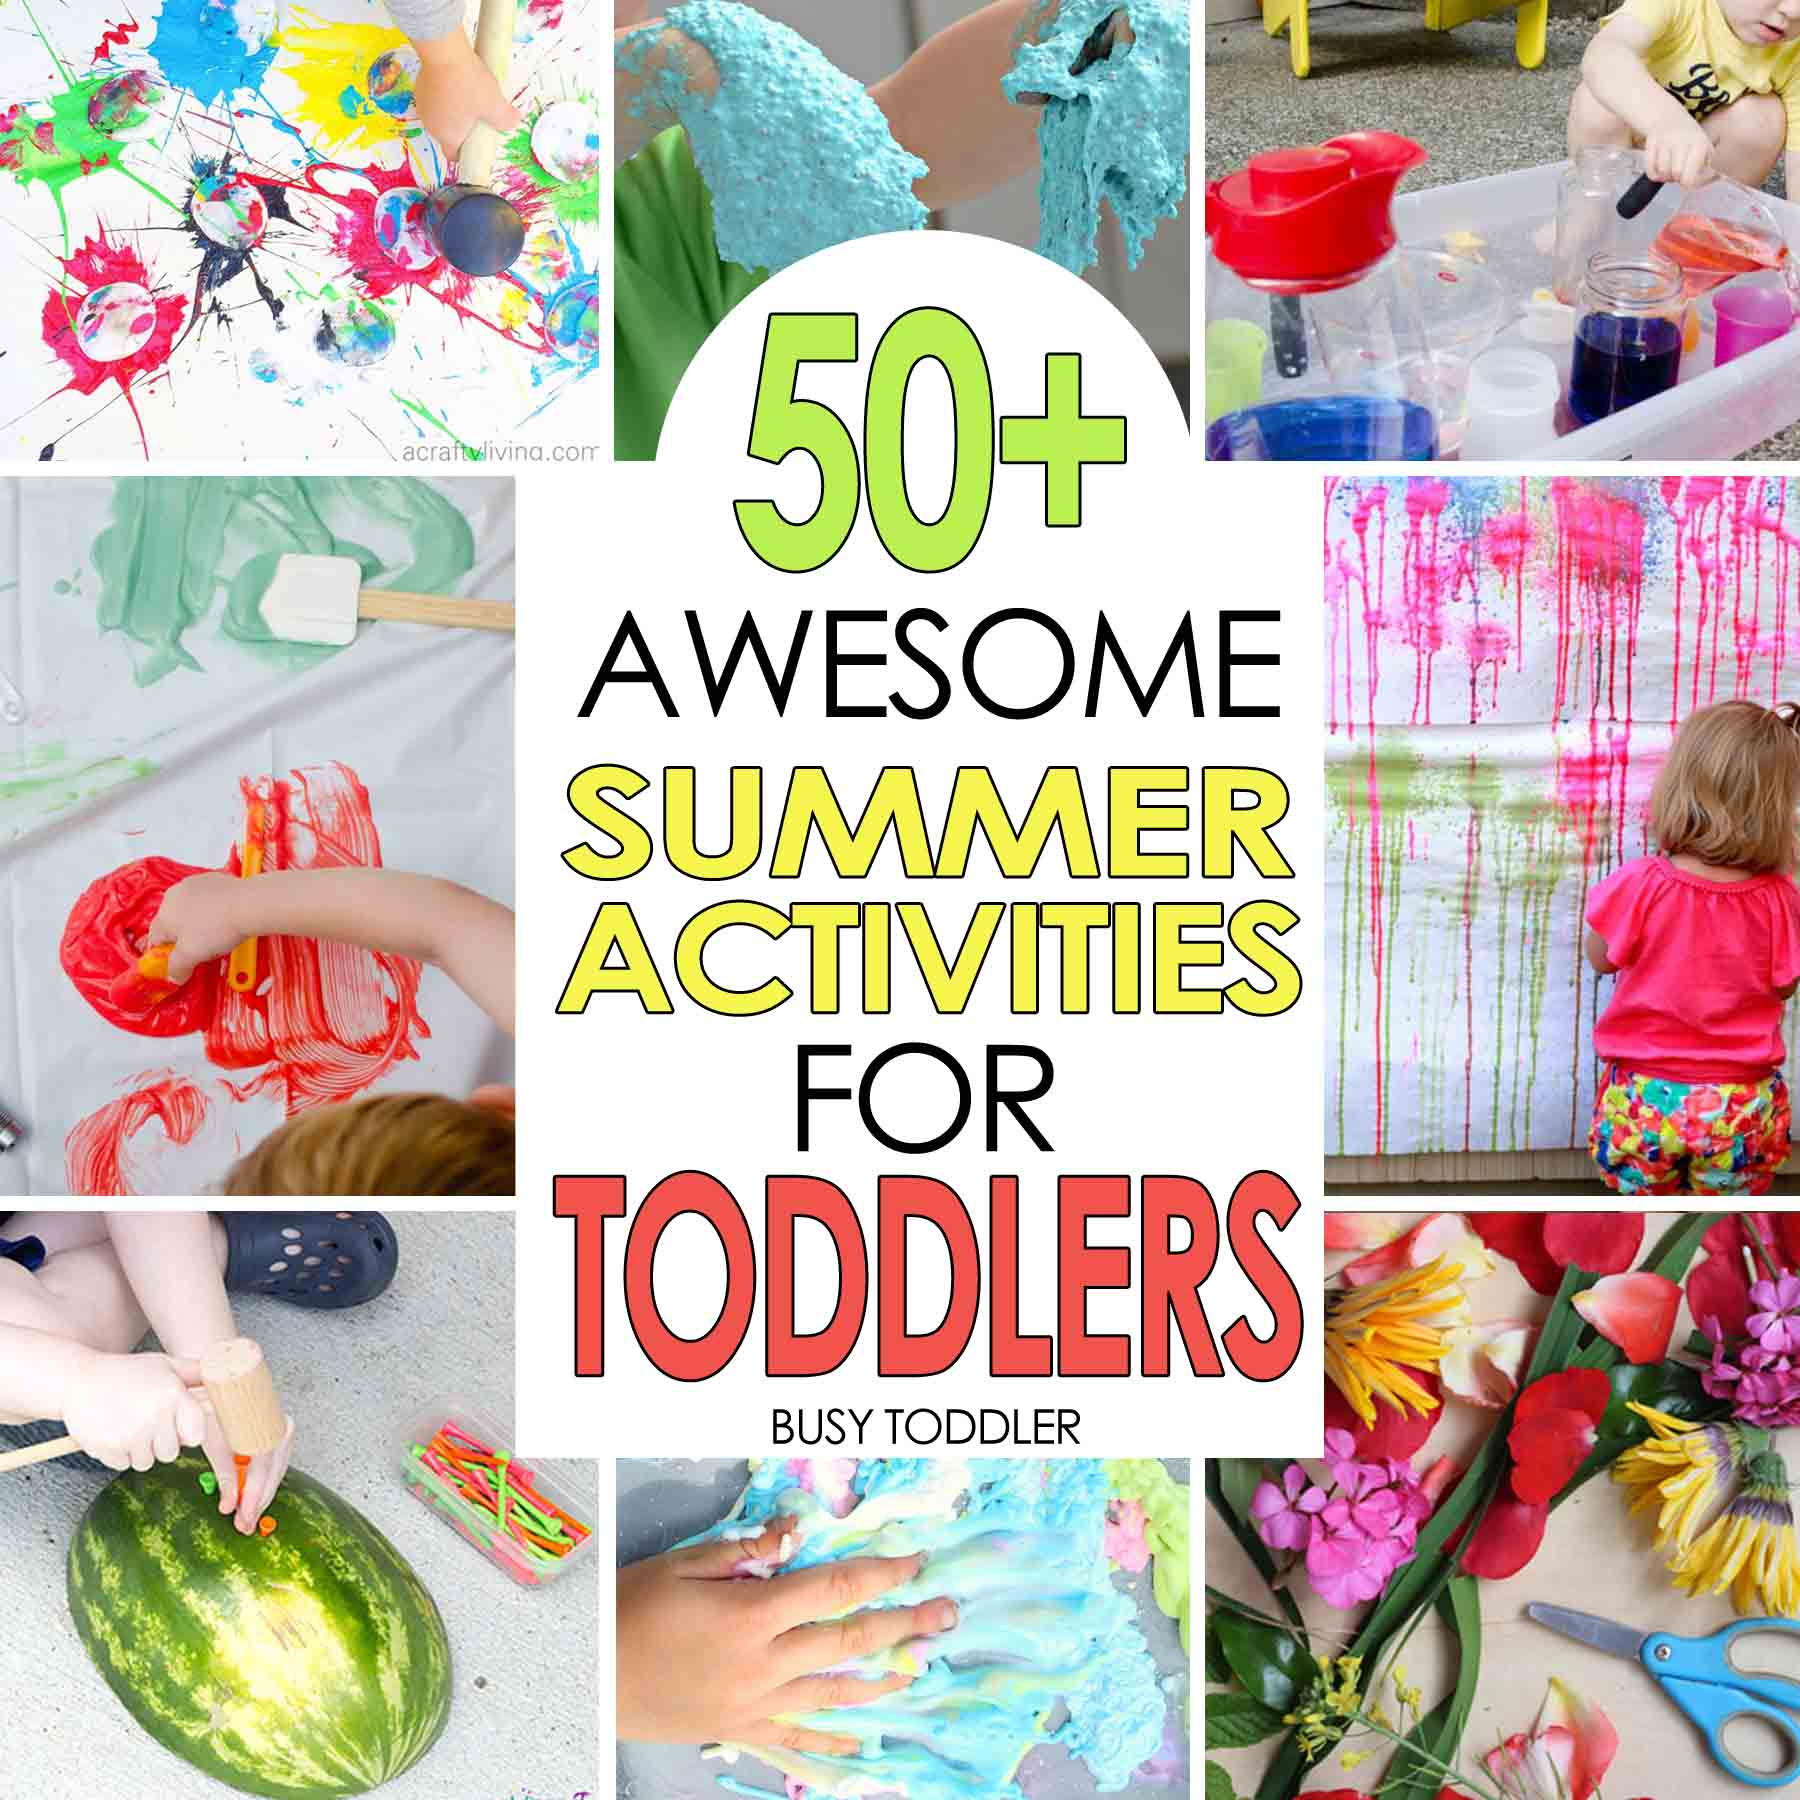 50+ Awesome Summer Activities For Toddlers - Busy Toddler